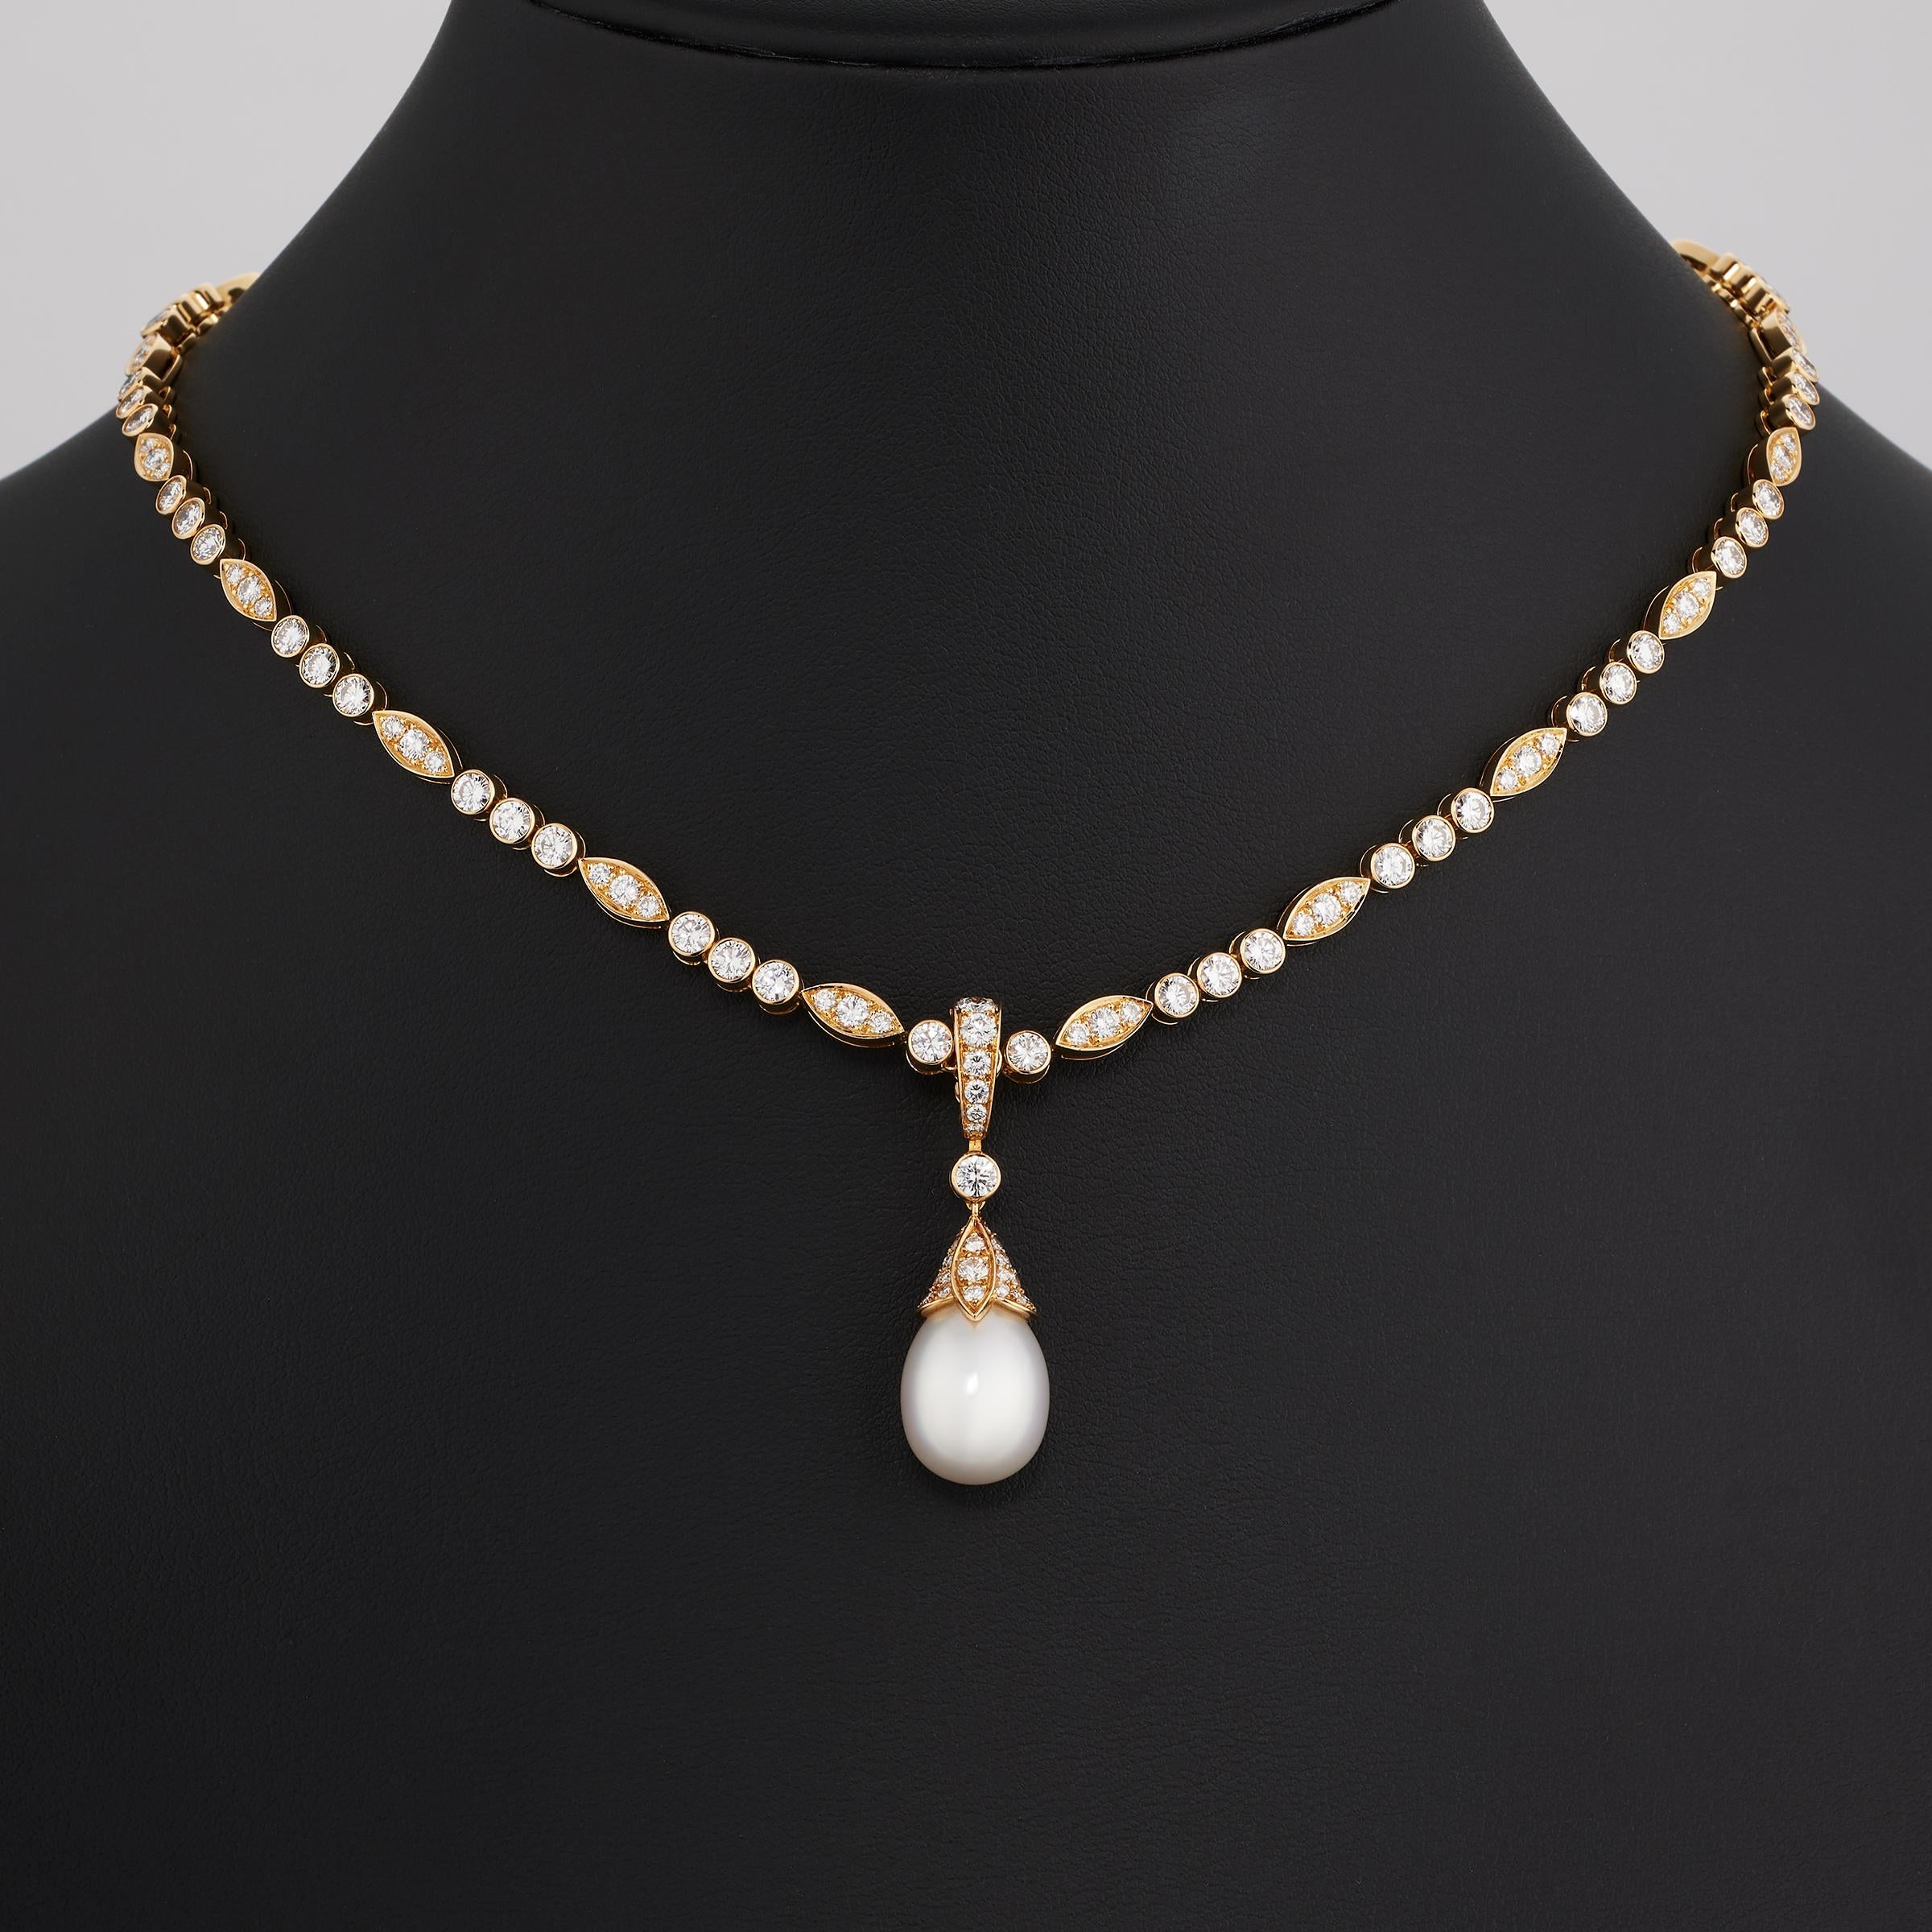 Brilliant Cut Cartier Diamond Line Necklace and Pearl Drop Pendant in 18K Yellow Gold For Sale